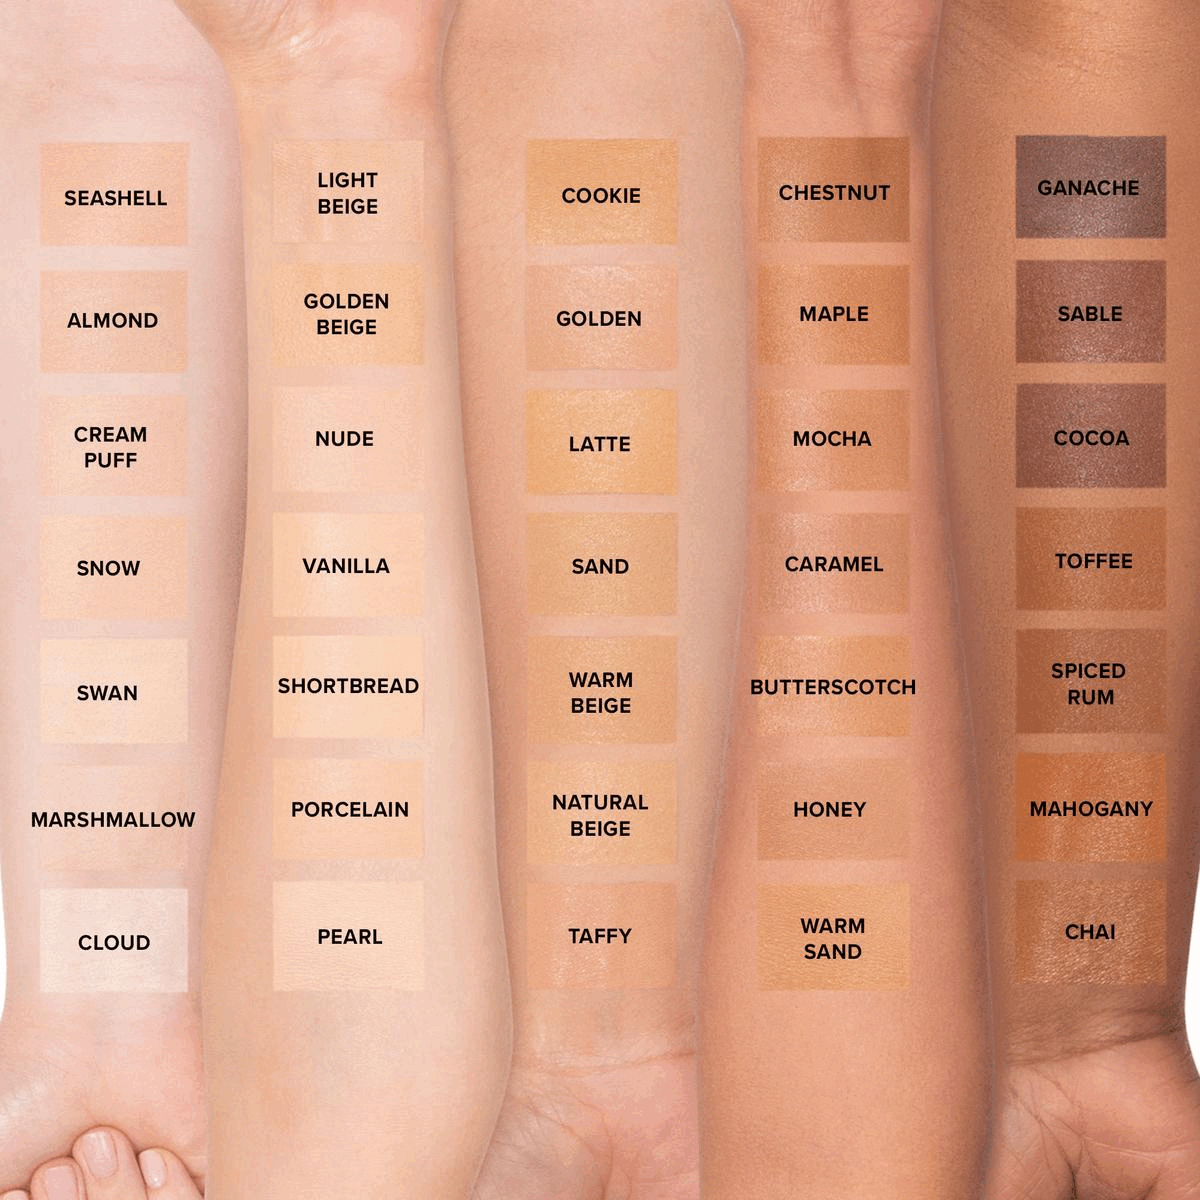 Image 1 Swatch imagery. Image 2, ingredient breakdown and benefits. Image 3, Comparison between born this way matte, born this way and born this way concealer. Image 4-Shade finder